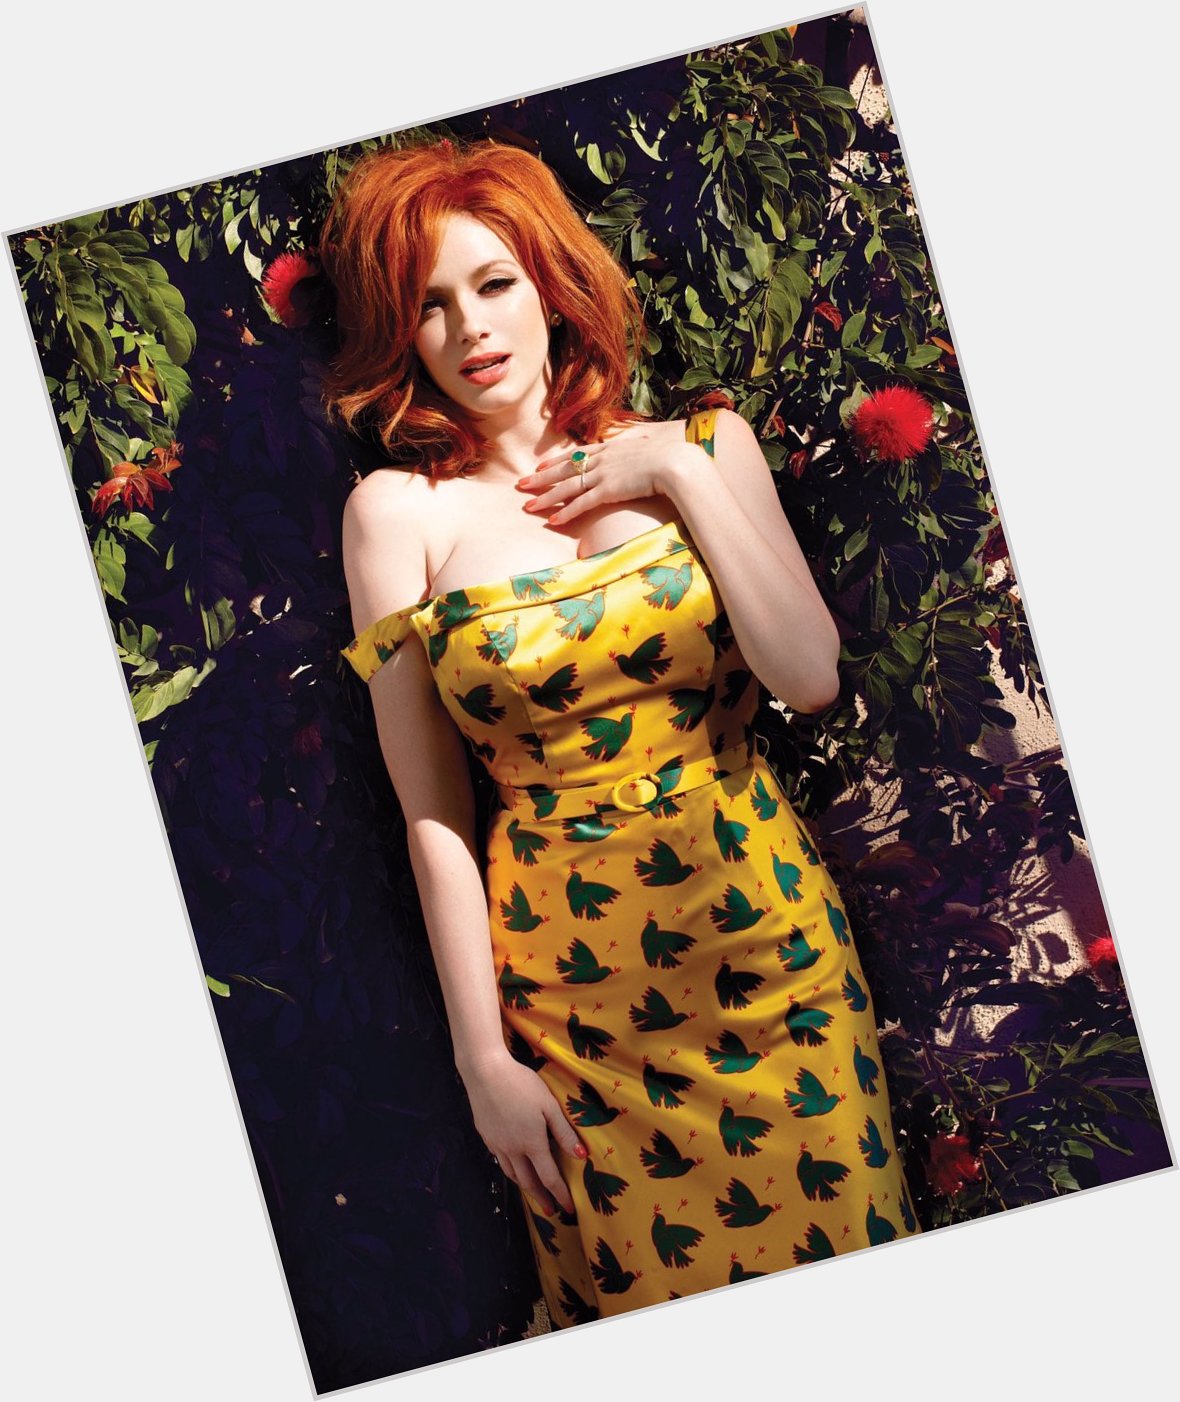 We may be a little late with this one but

Happy Birthday Christina Hendricks  